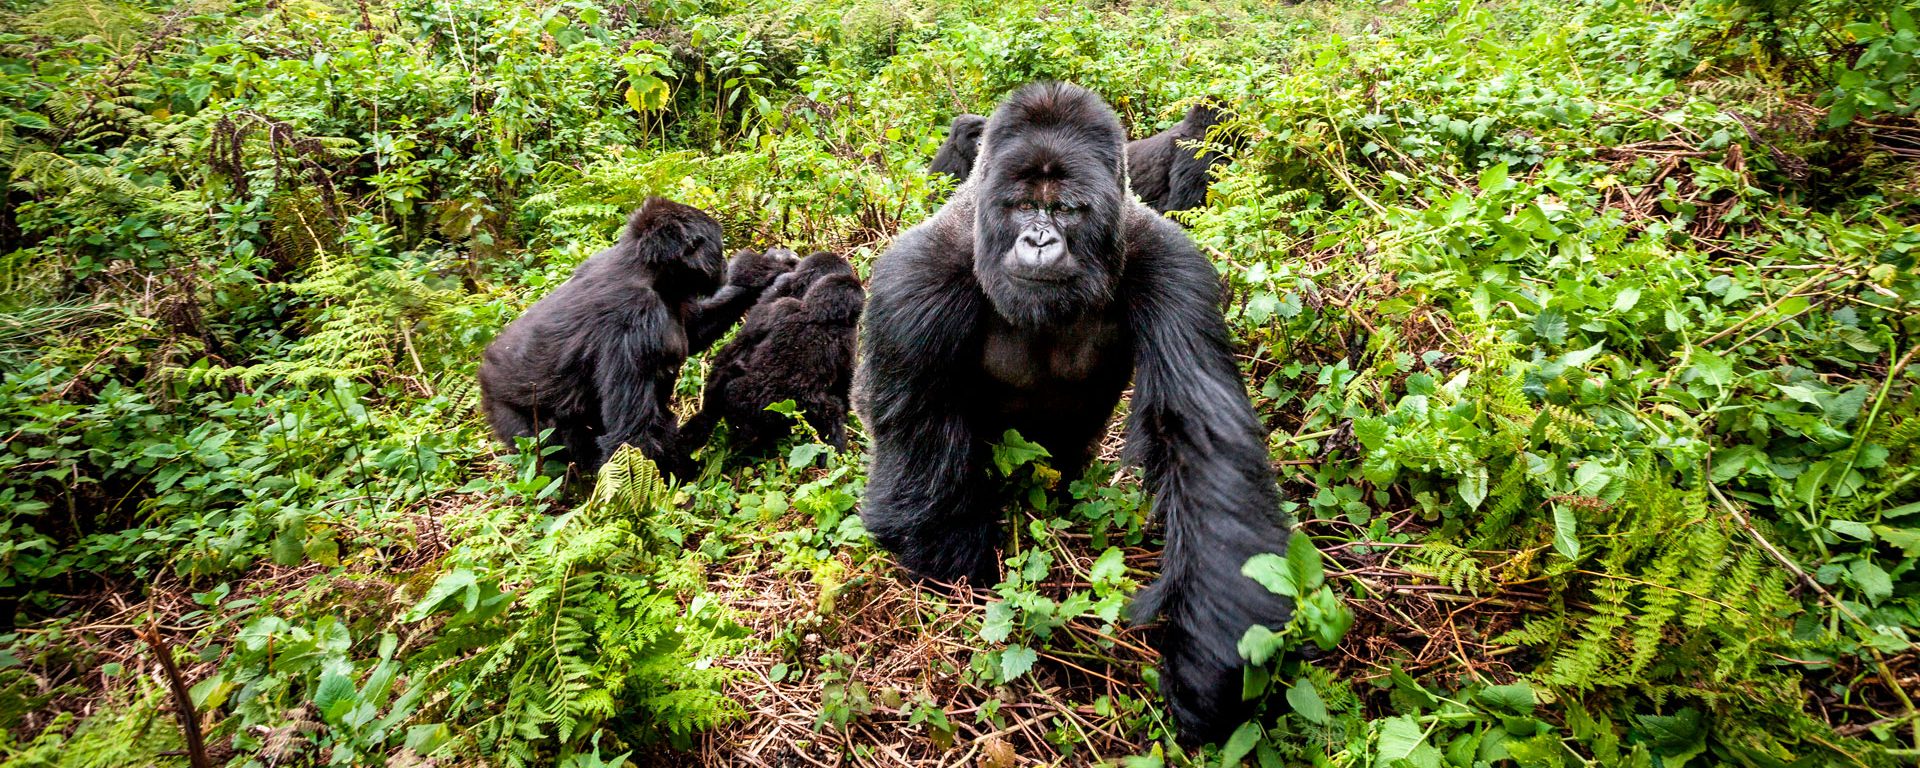 Silverback leads a group of mountain gorillas in Volcanoes National Park, Rwanda